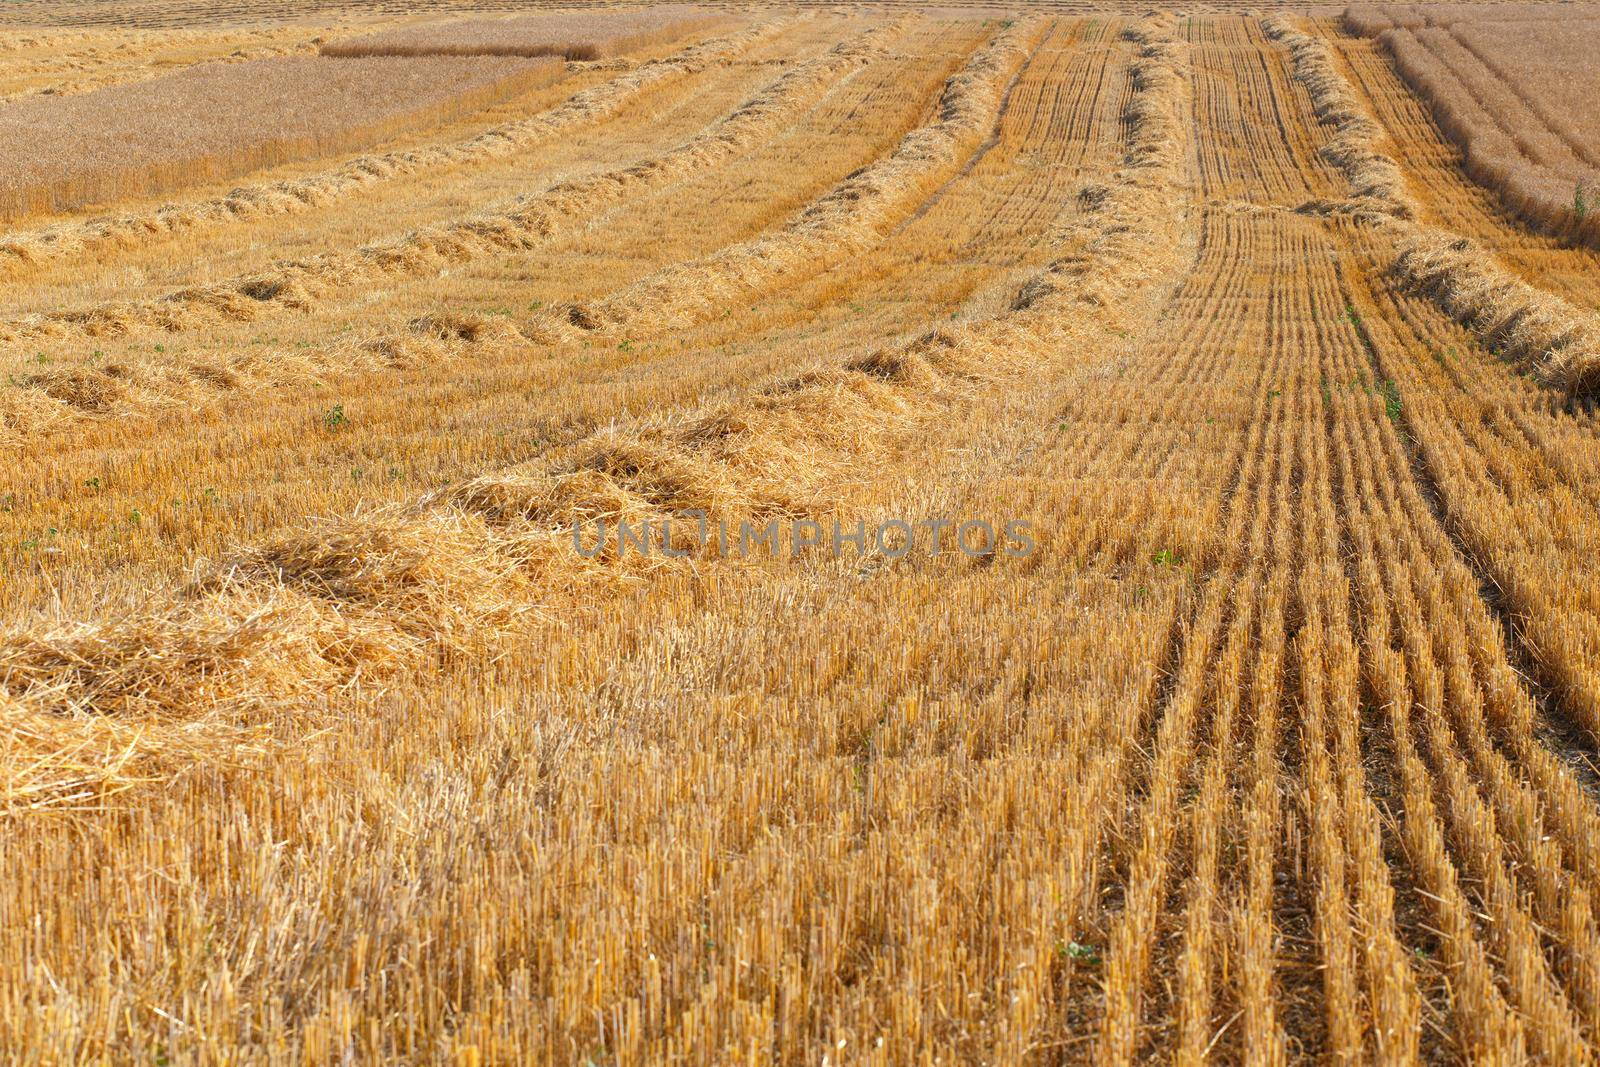 Harvested field by BY-_-BY